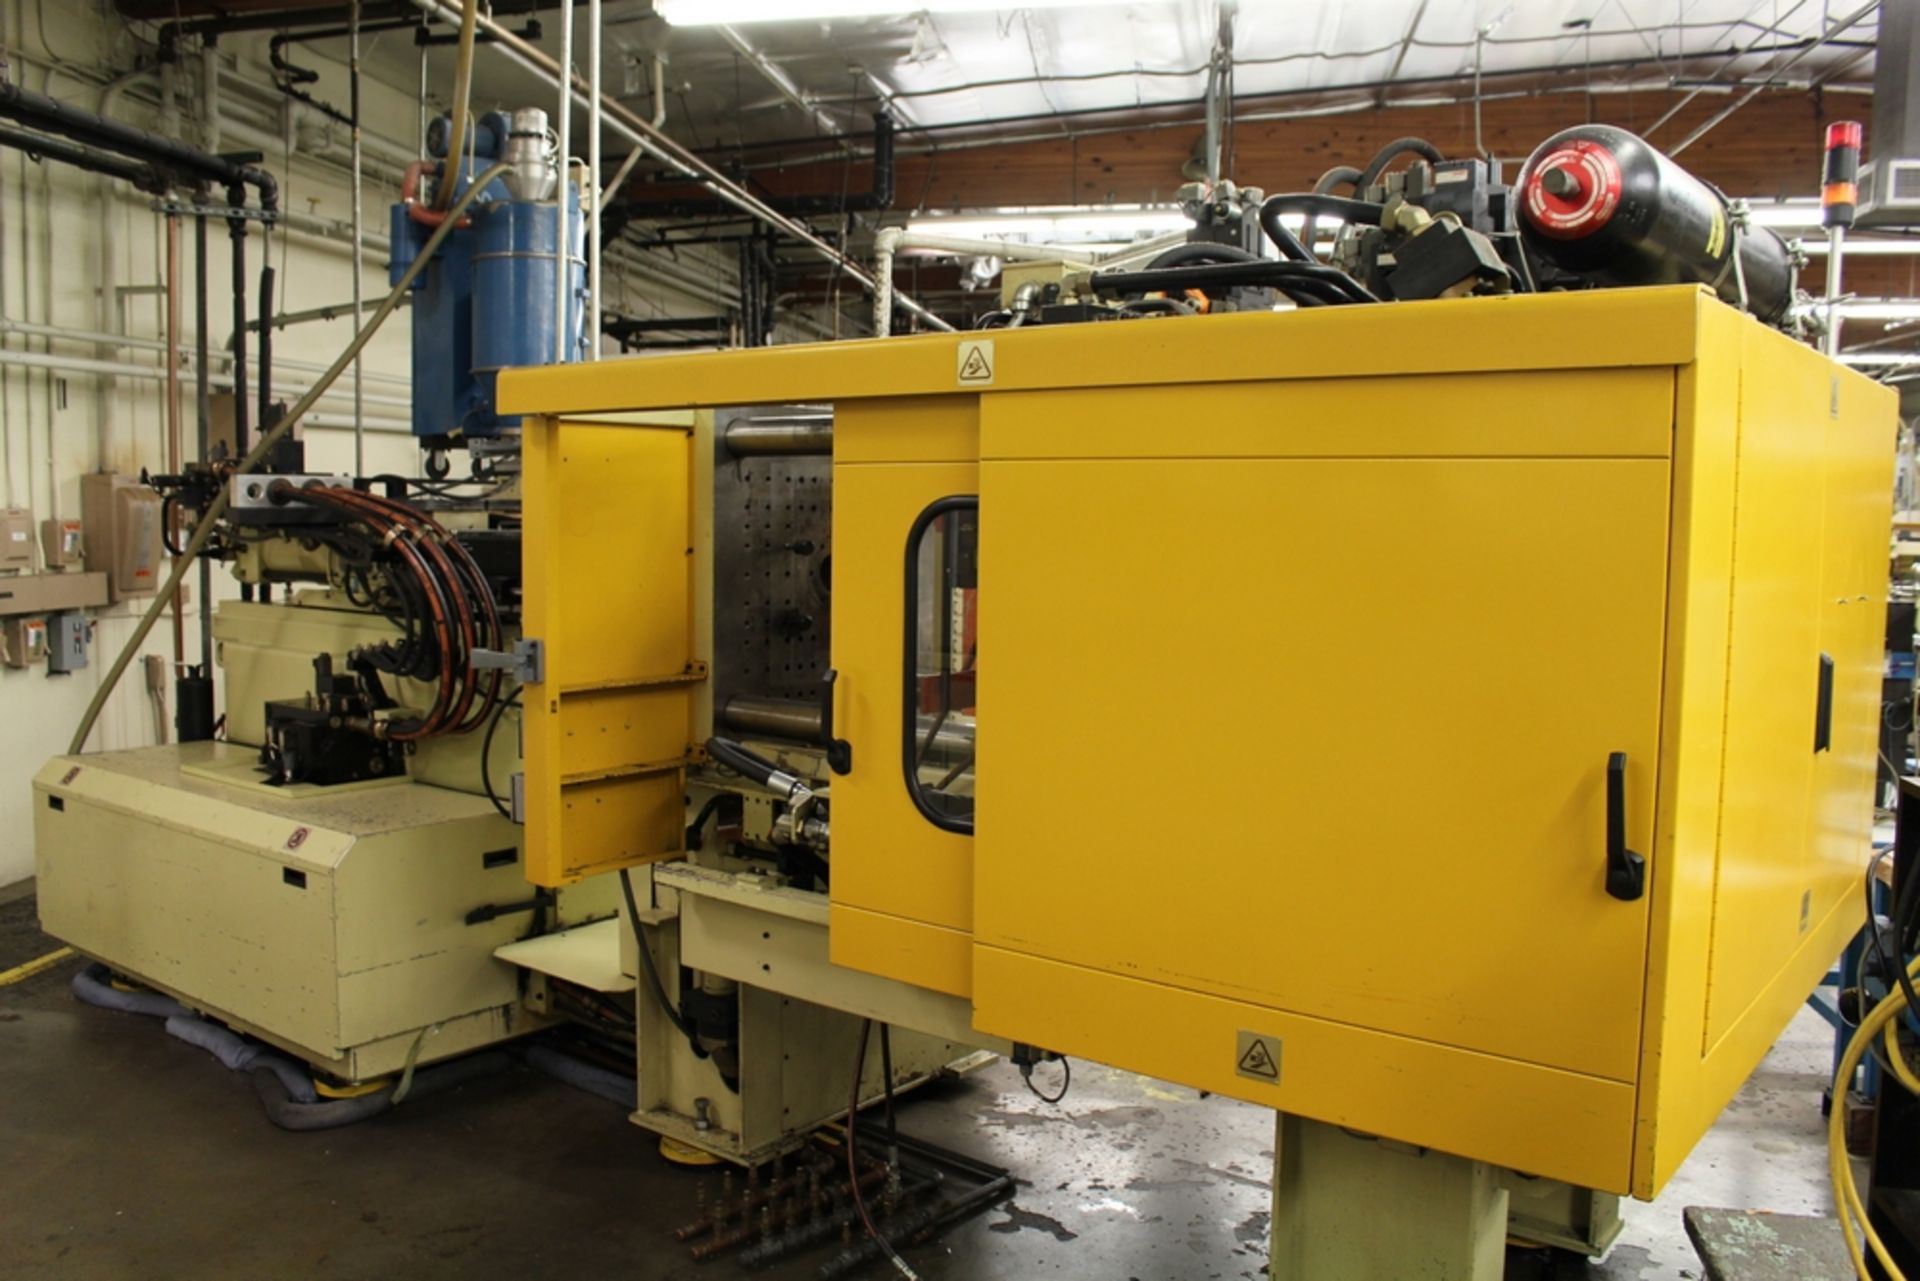 1996 HUSKY 225-TON INJECTION MOLDING MACHINE, MODEL G225GEN-RS50/50, S/N 12483, 36.5" X 36.5" - Image 7 of 8